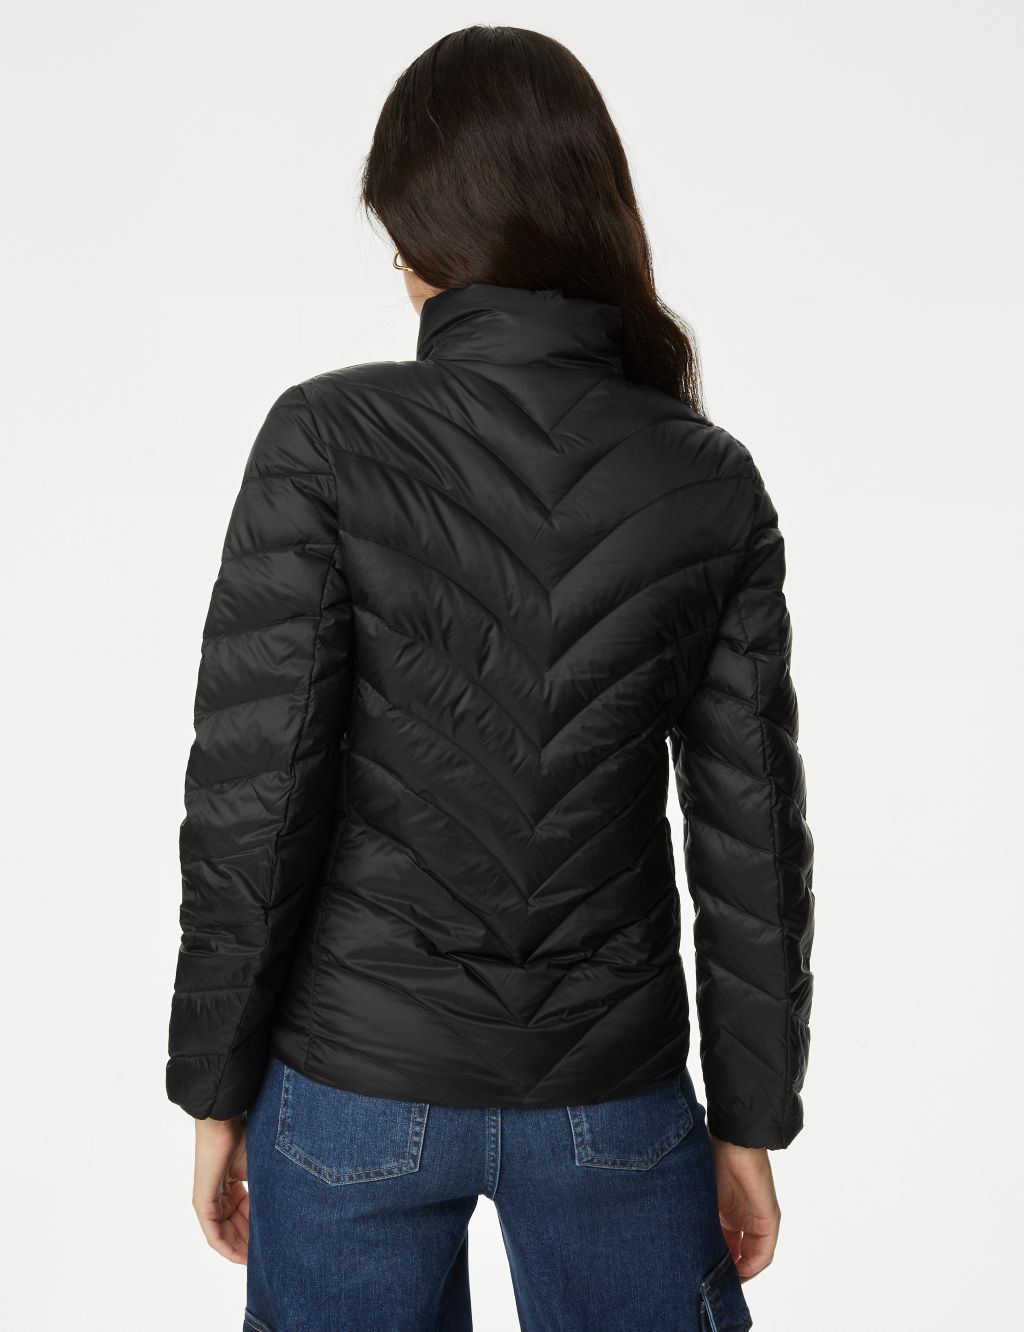 Feather & Down Lightweight Puffer Jacket image 5